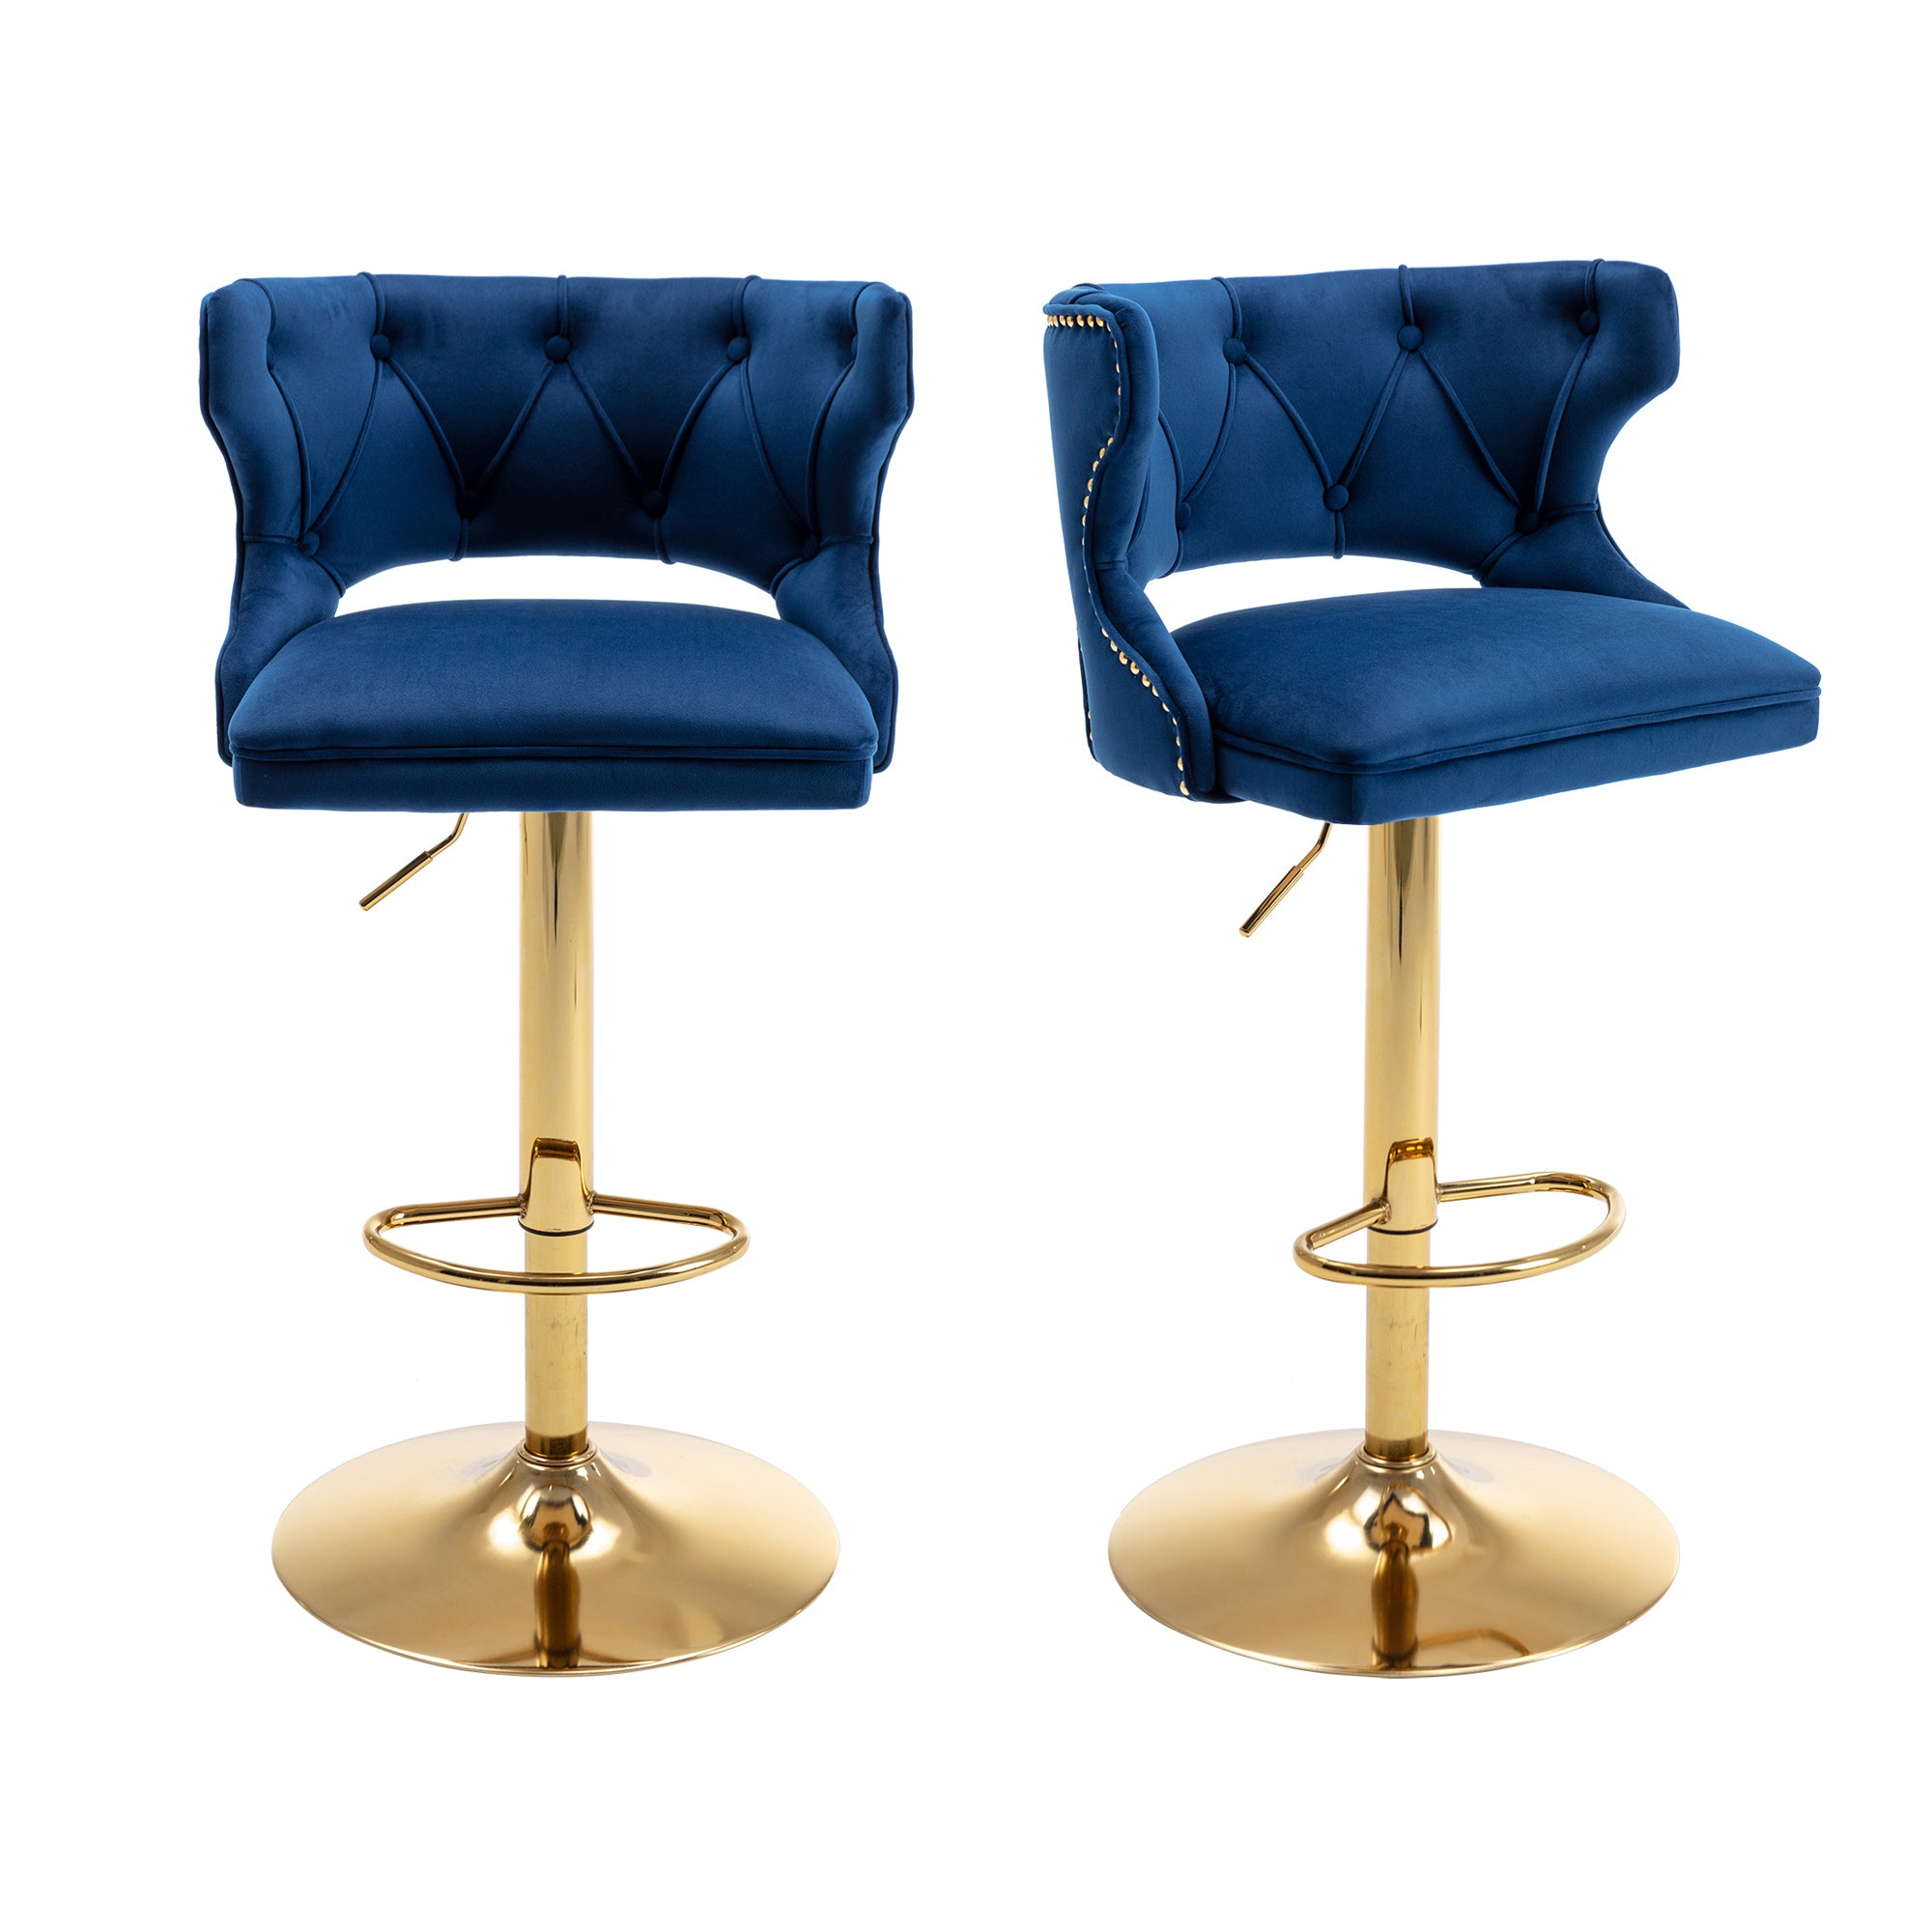 Bar Stools With Back and Footrest Counter Height Dining Chairs (Set of 2) - Velvet Blue